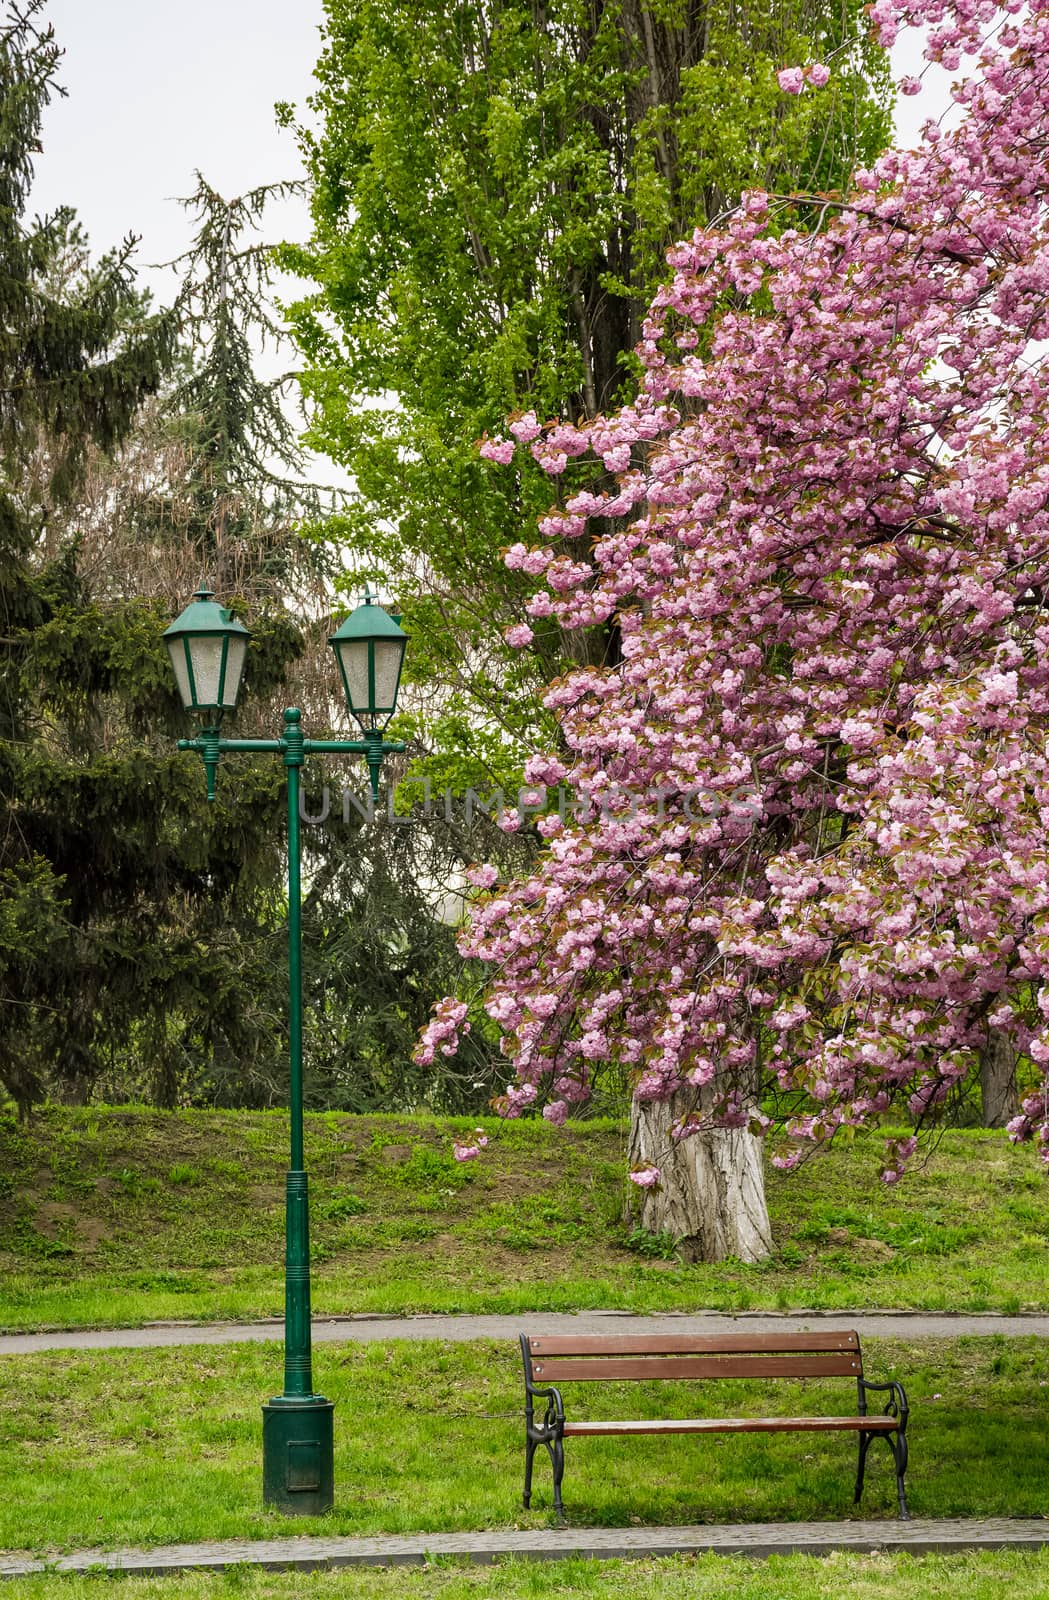 lantern, wooden bench and cherry blossom in citypark. beautiful spring background